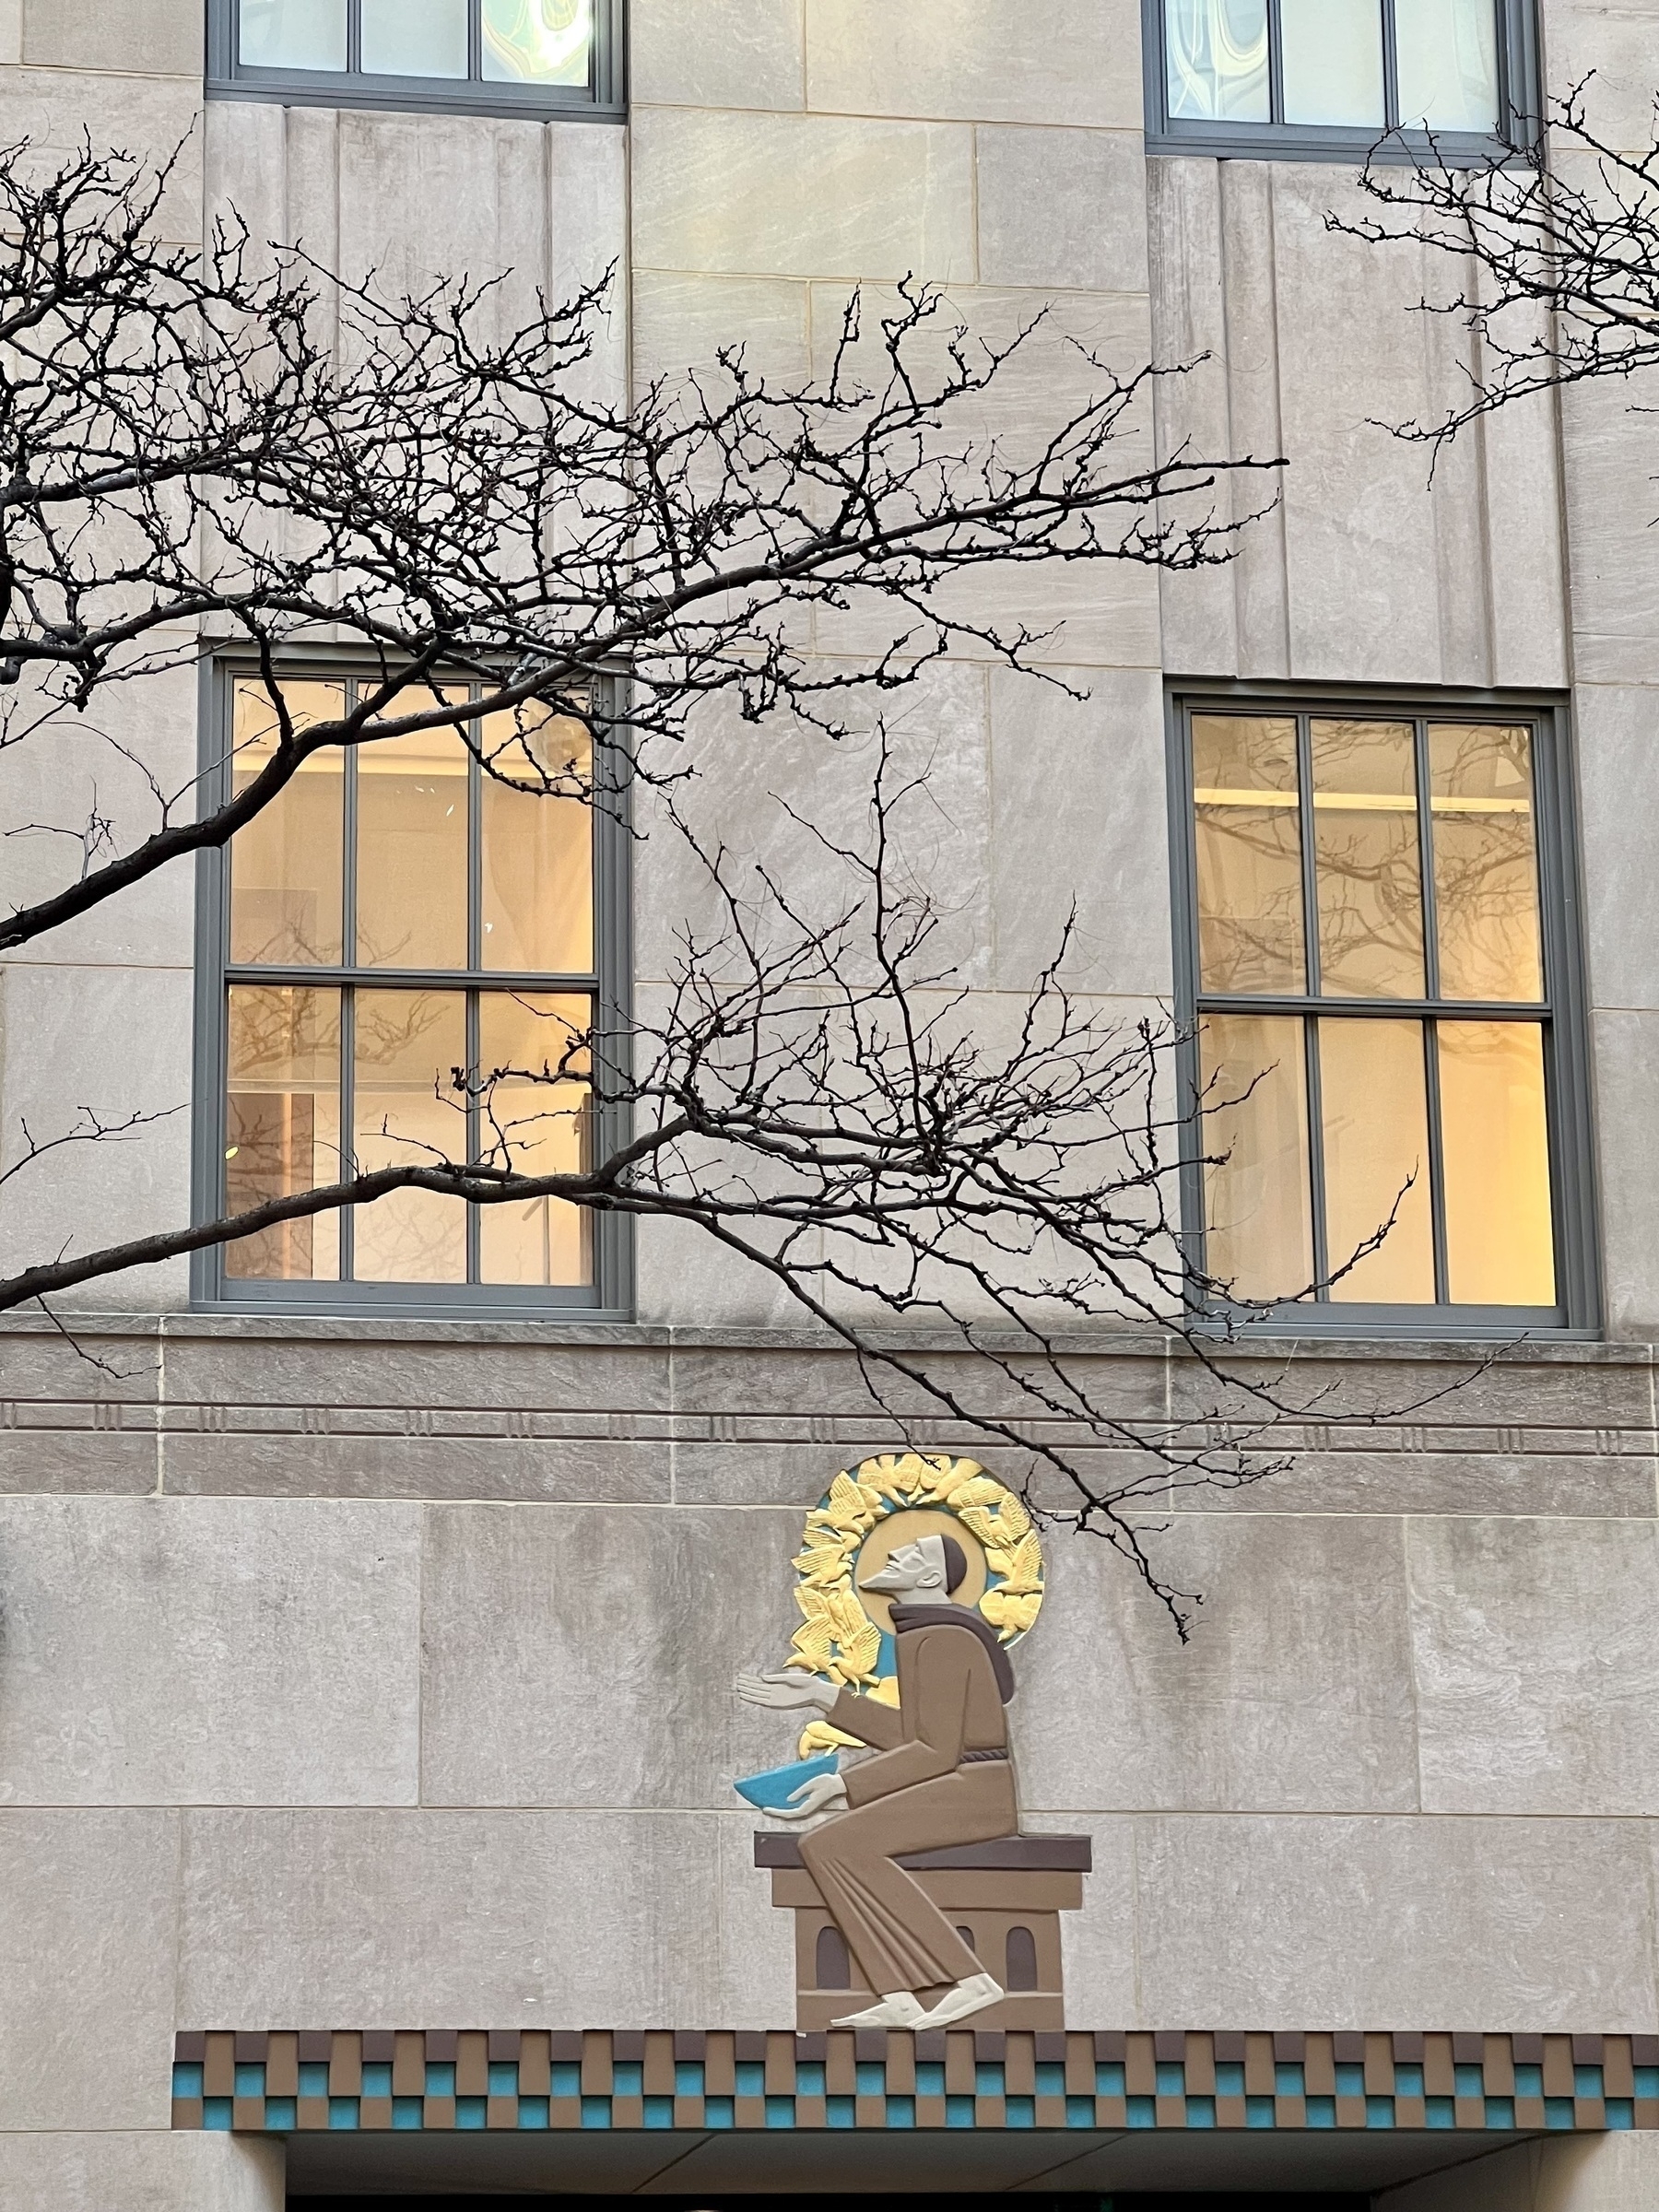 Bare tree branches frame a view of a building with warmly lit windows and an artistic depiction of Saint Francis seated and feeding birds on the wall outside.